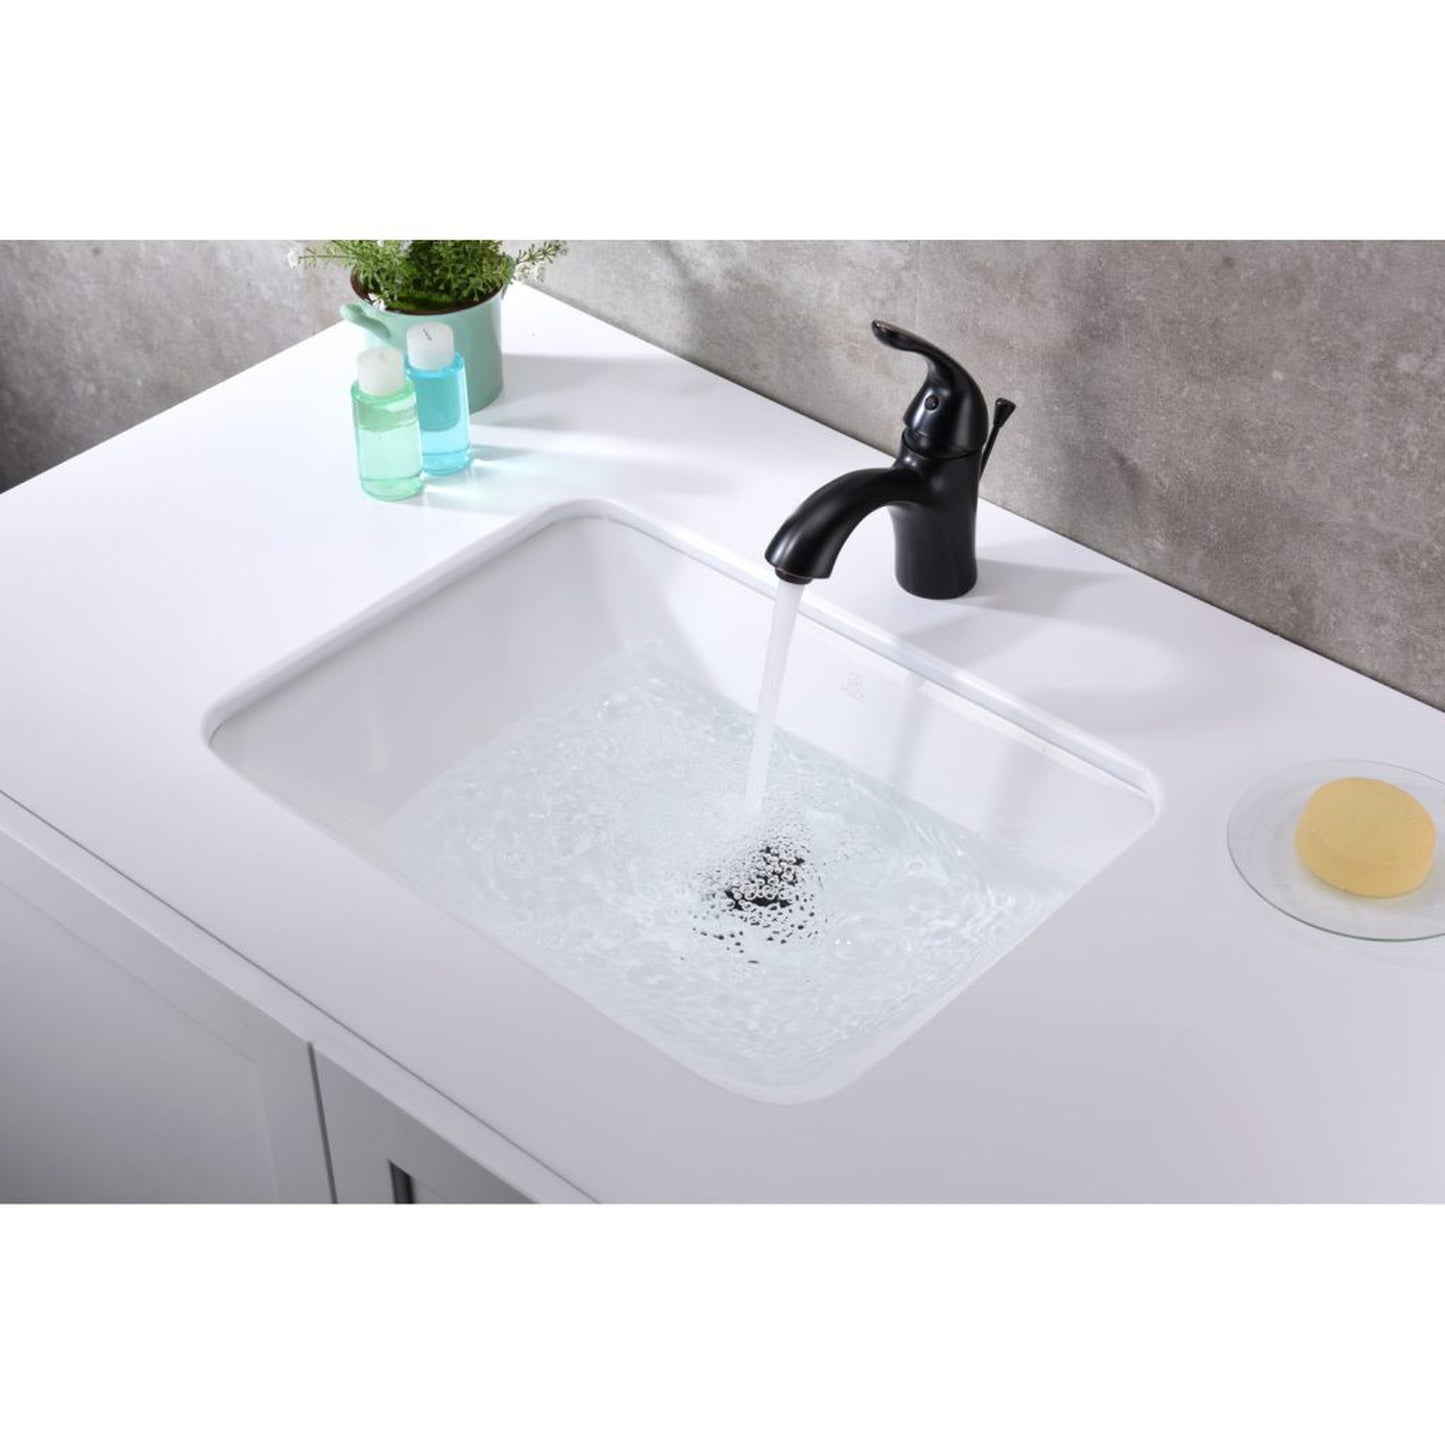 ANZZI Dahlia Series 21" x 15" Rectangular Glossy White Undermount Sink With Built-In Overflow